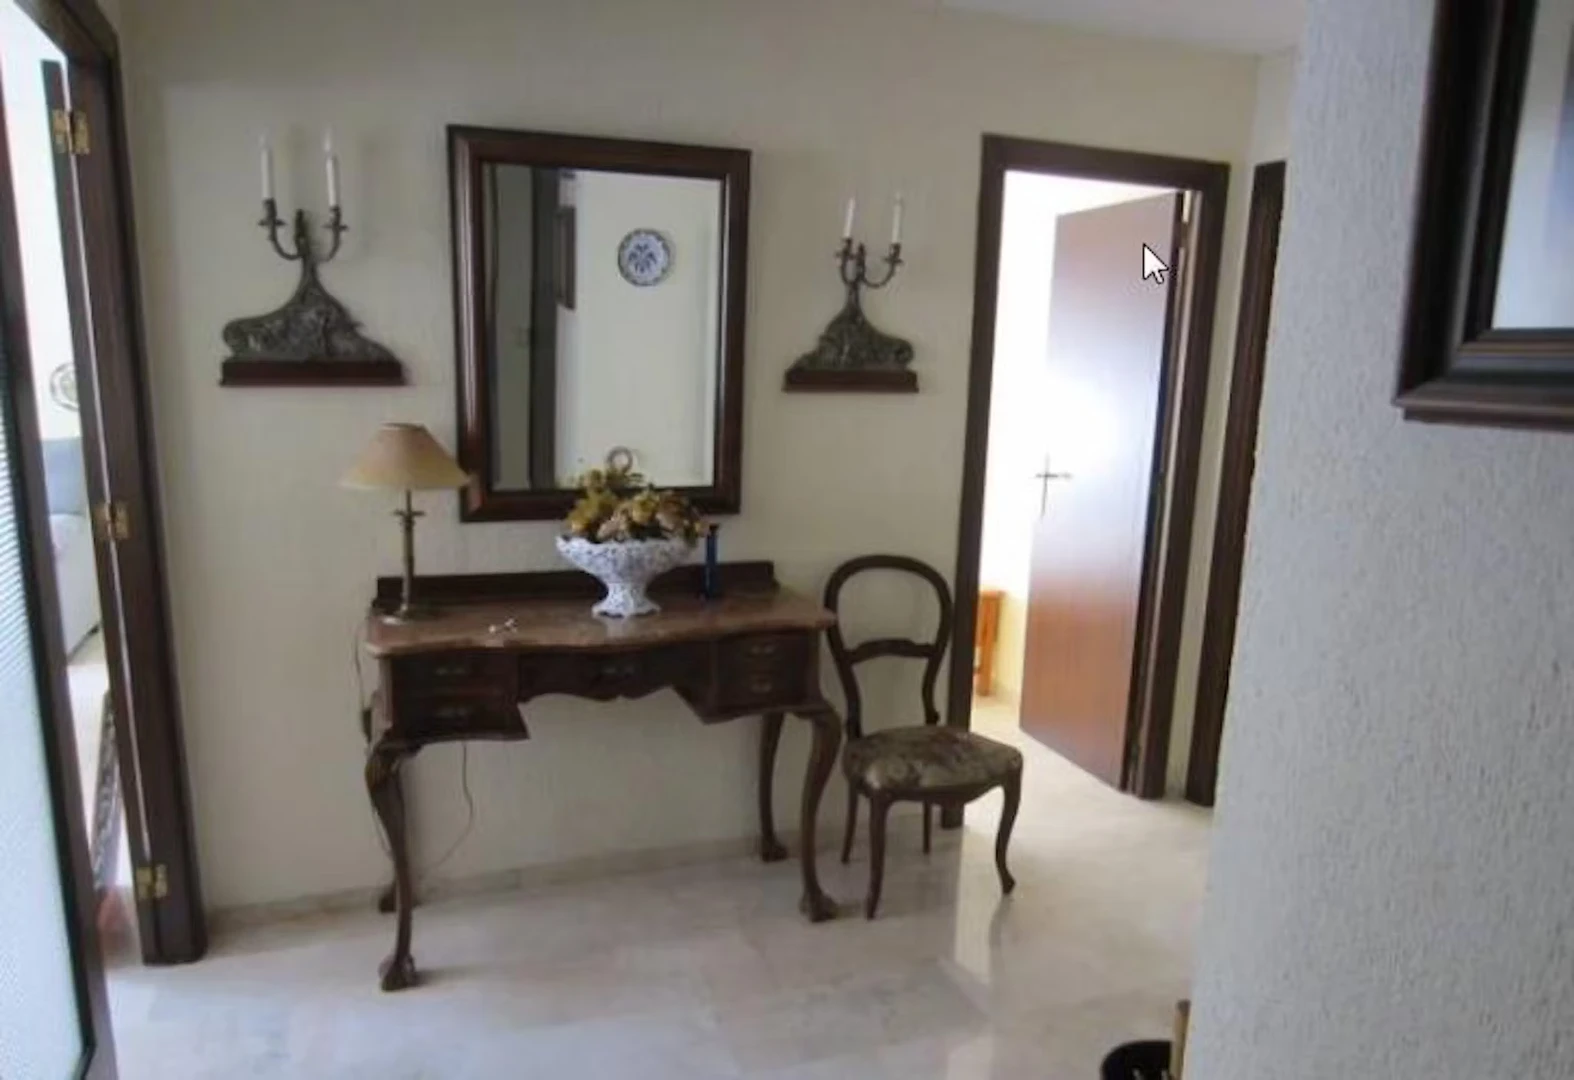 Renting rooms by the month in Granada